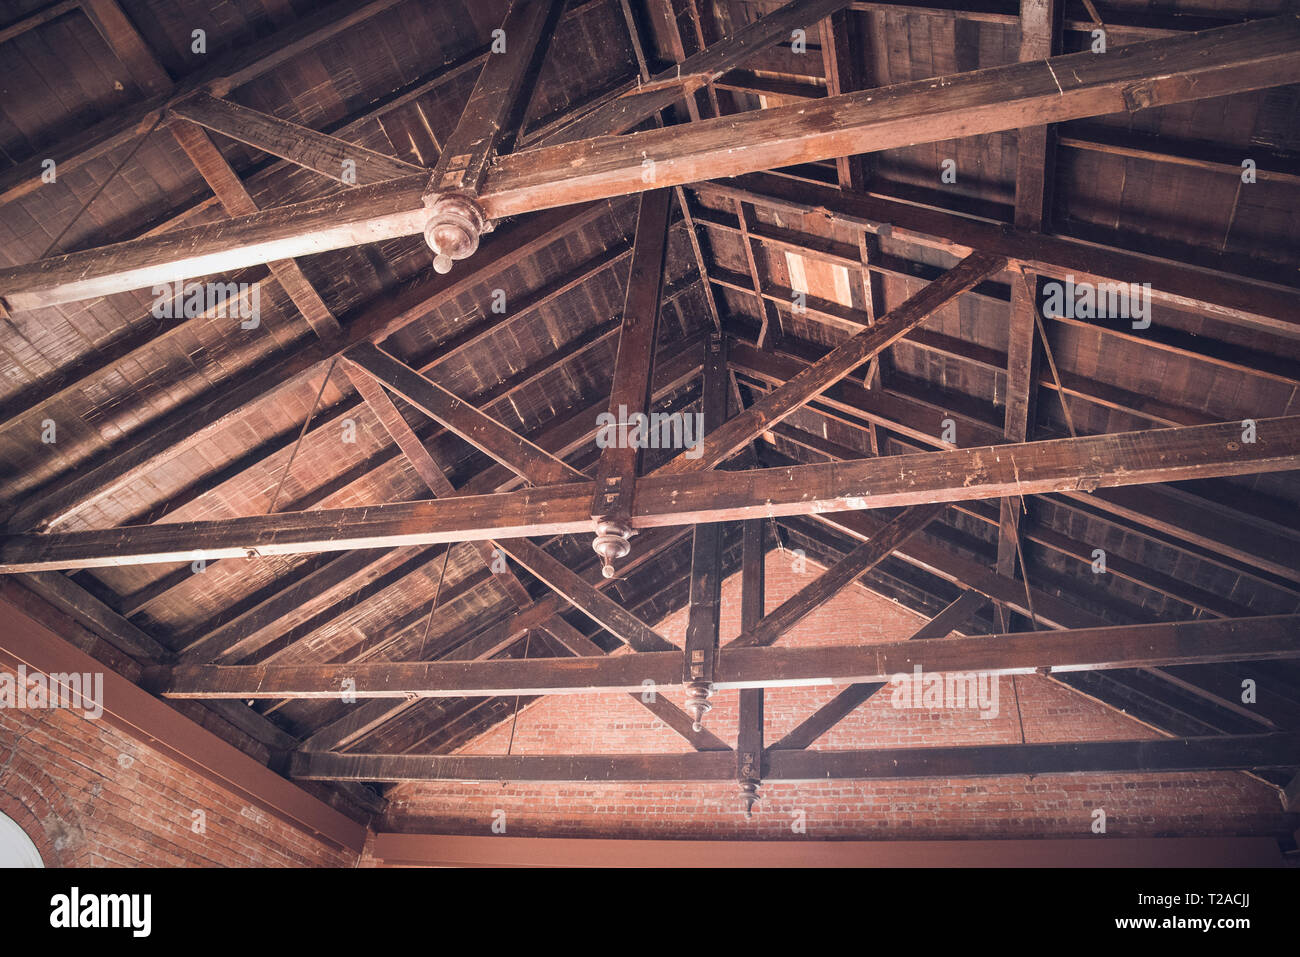 Interior side of roof showing support structure and cross beams. Stock Photo